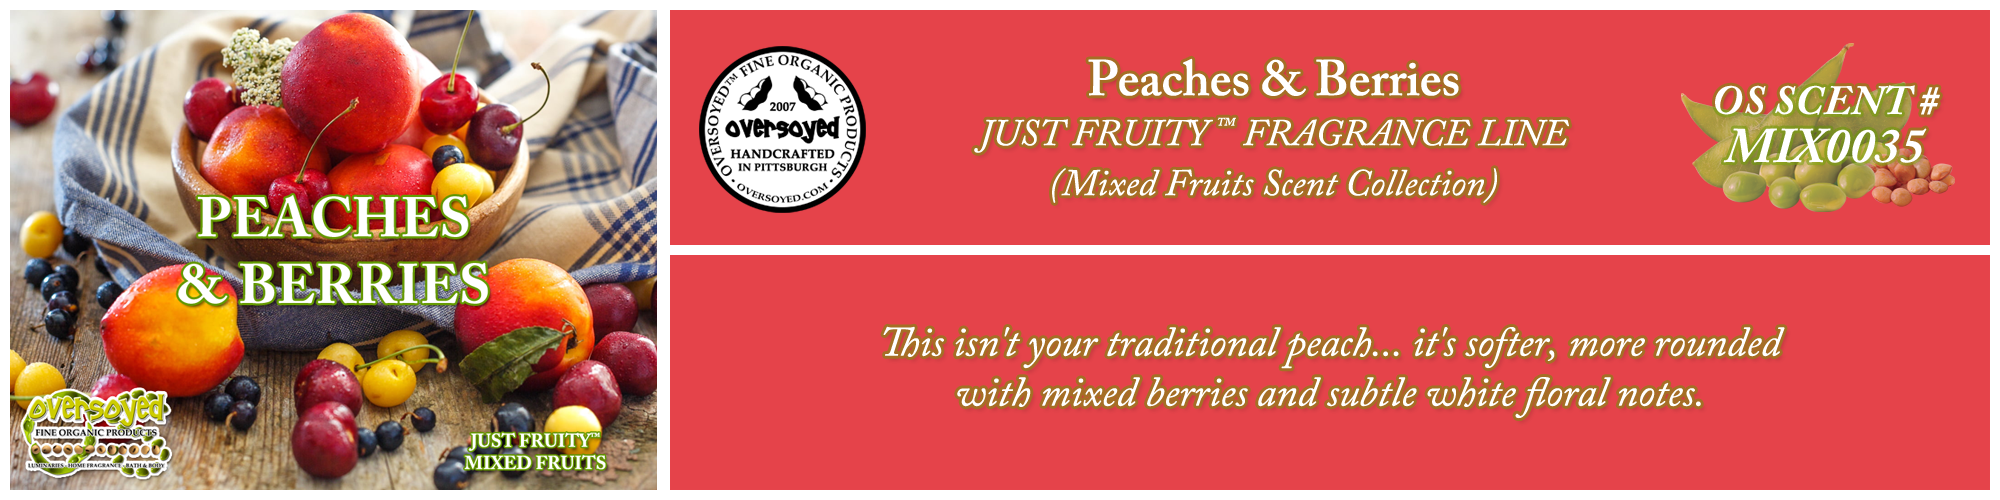 Peaches & Berries Handcrafted Products Collection